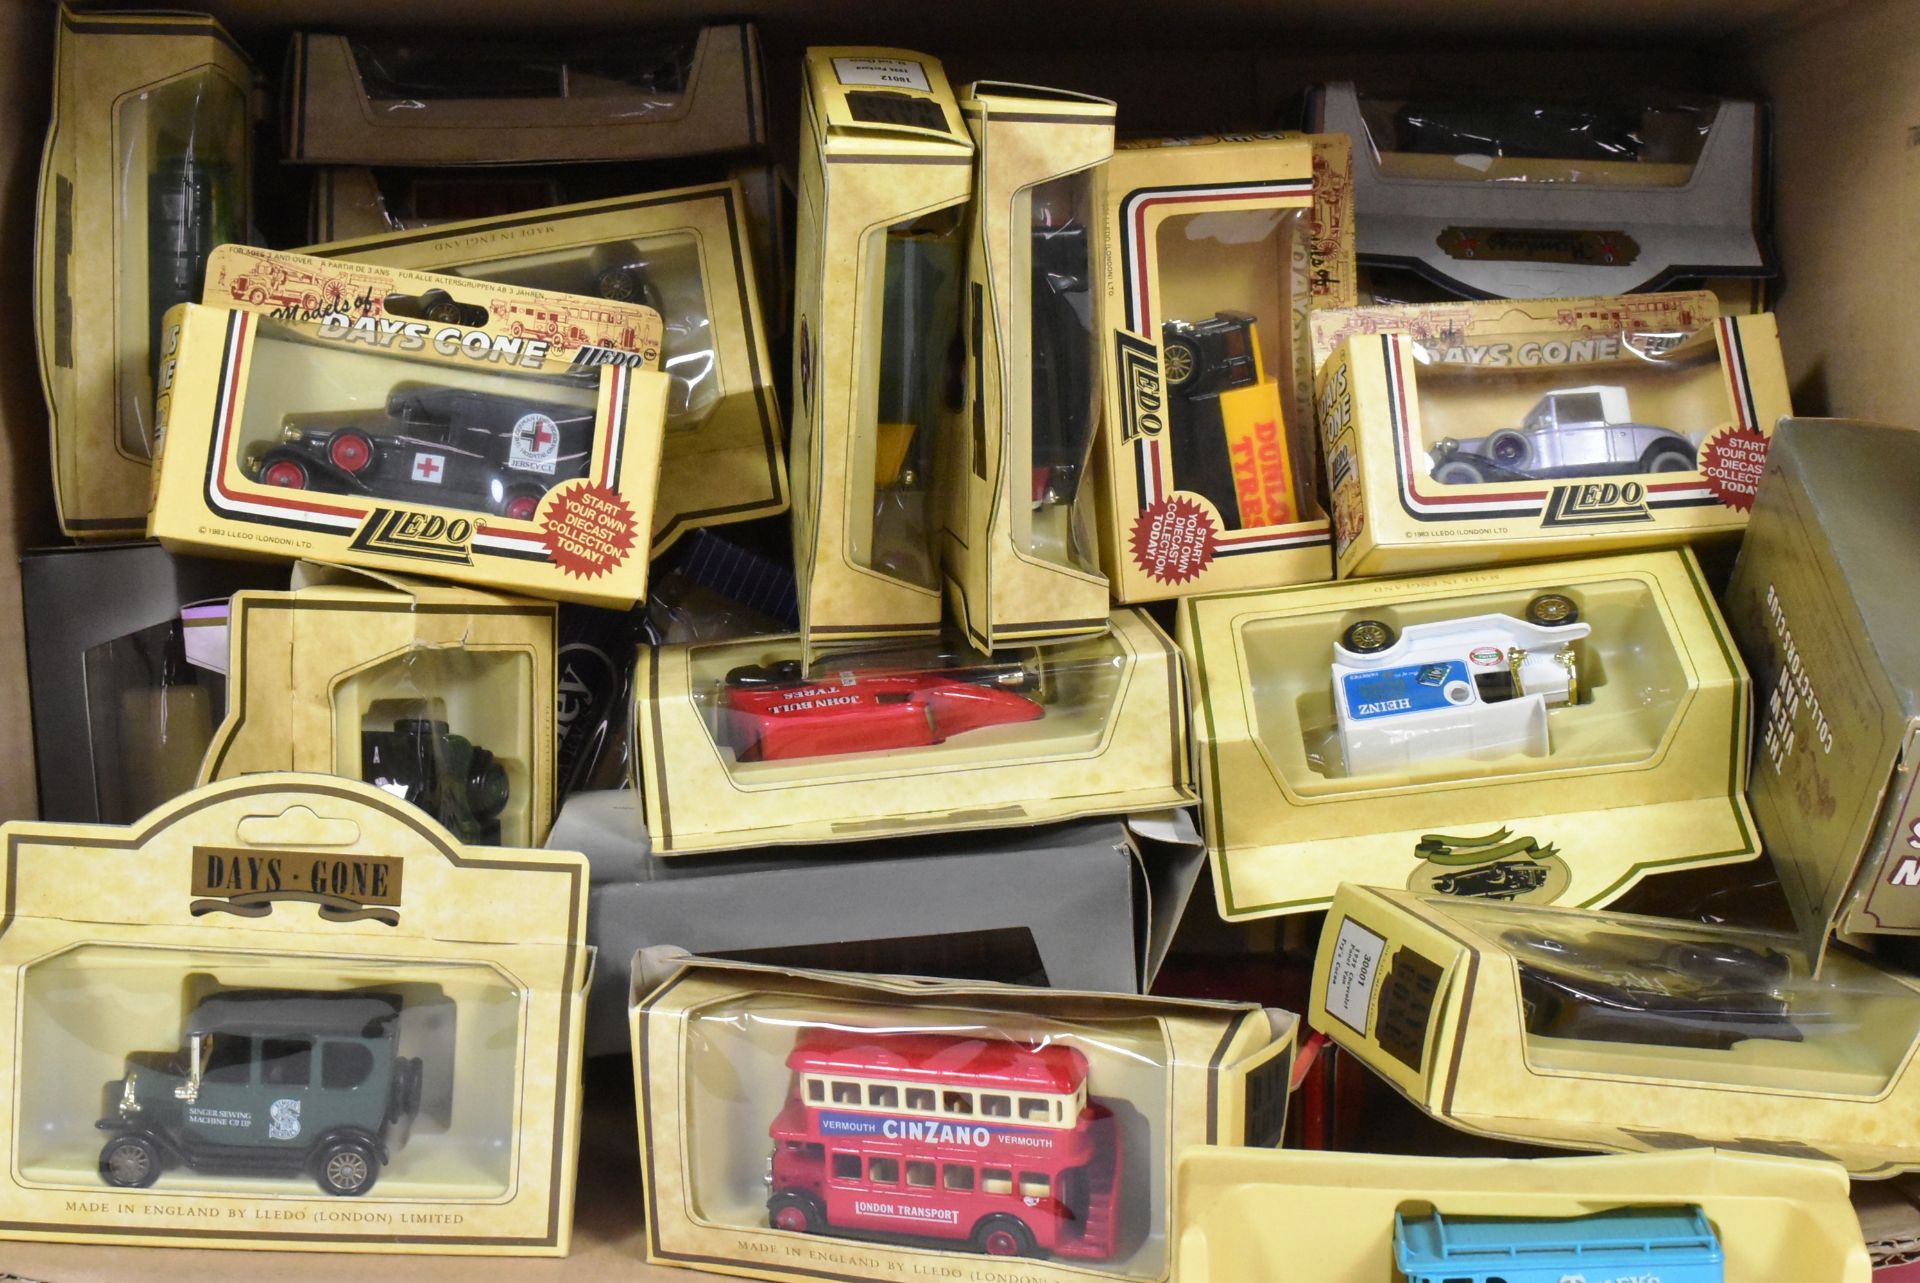 DIECAST - LARGE COLLECTION OF LLEDO DAYS GONE DIECAST MODELS - Image 4 of 4